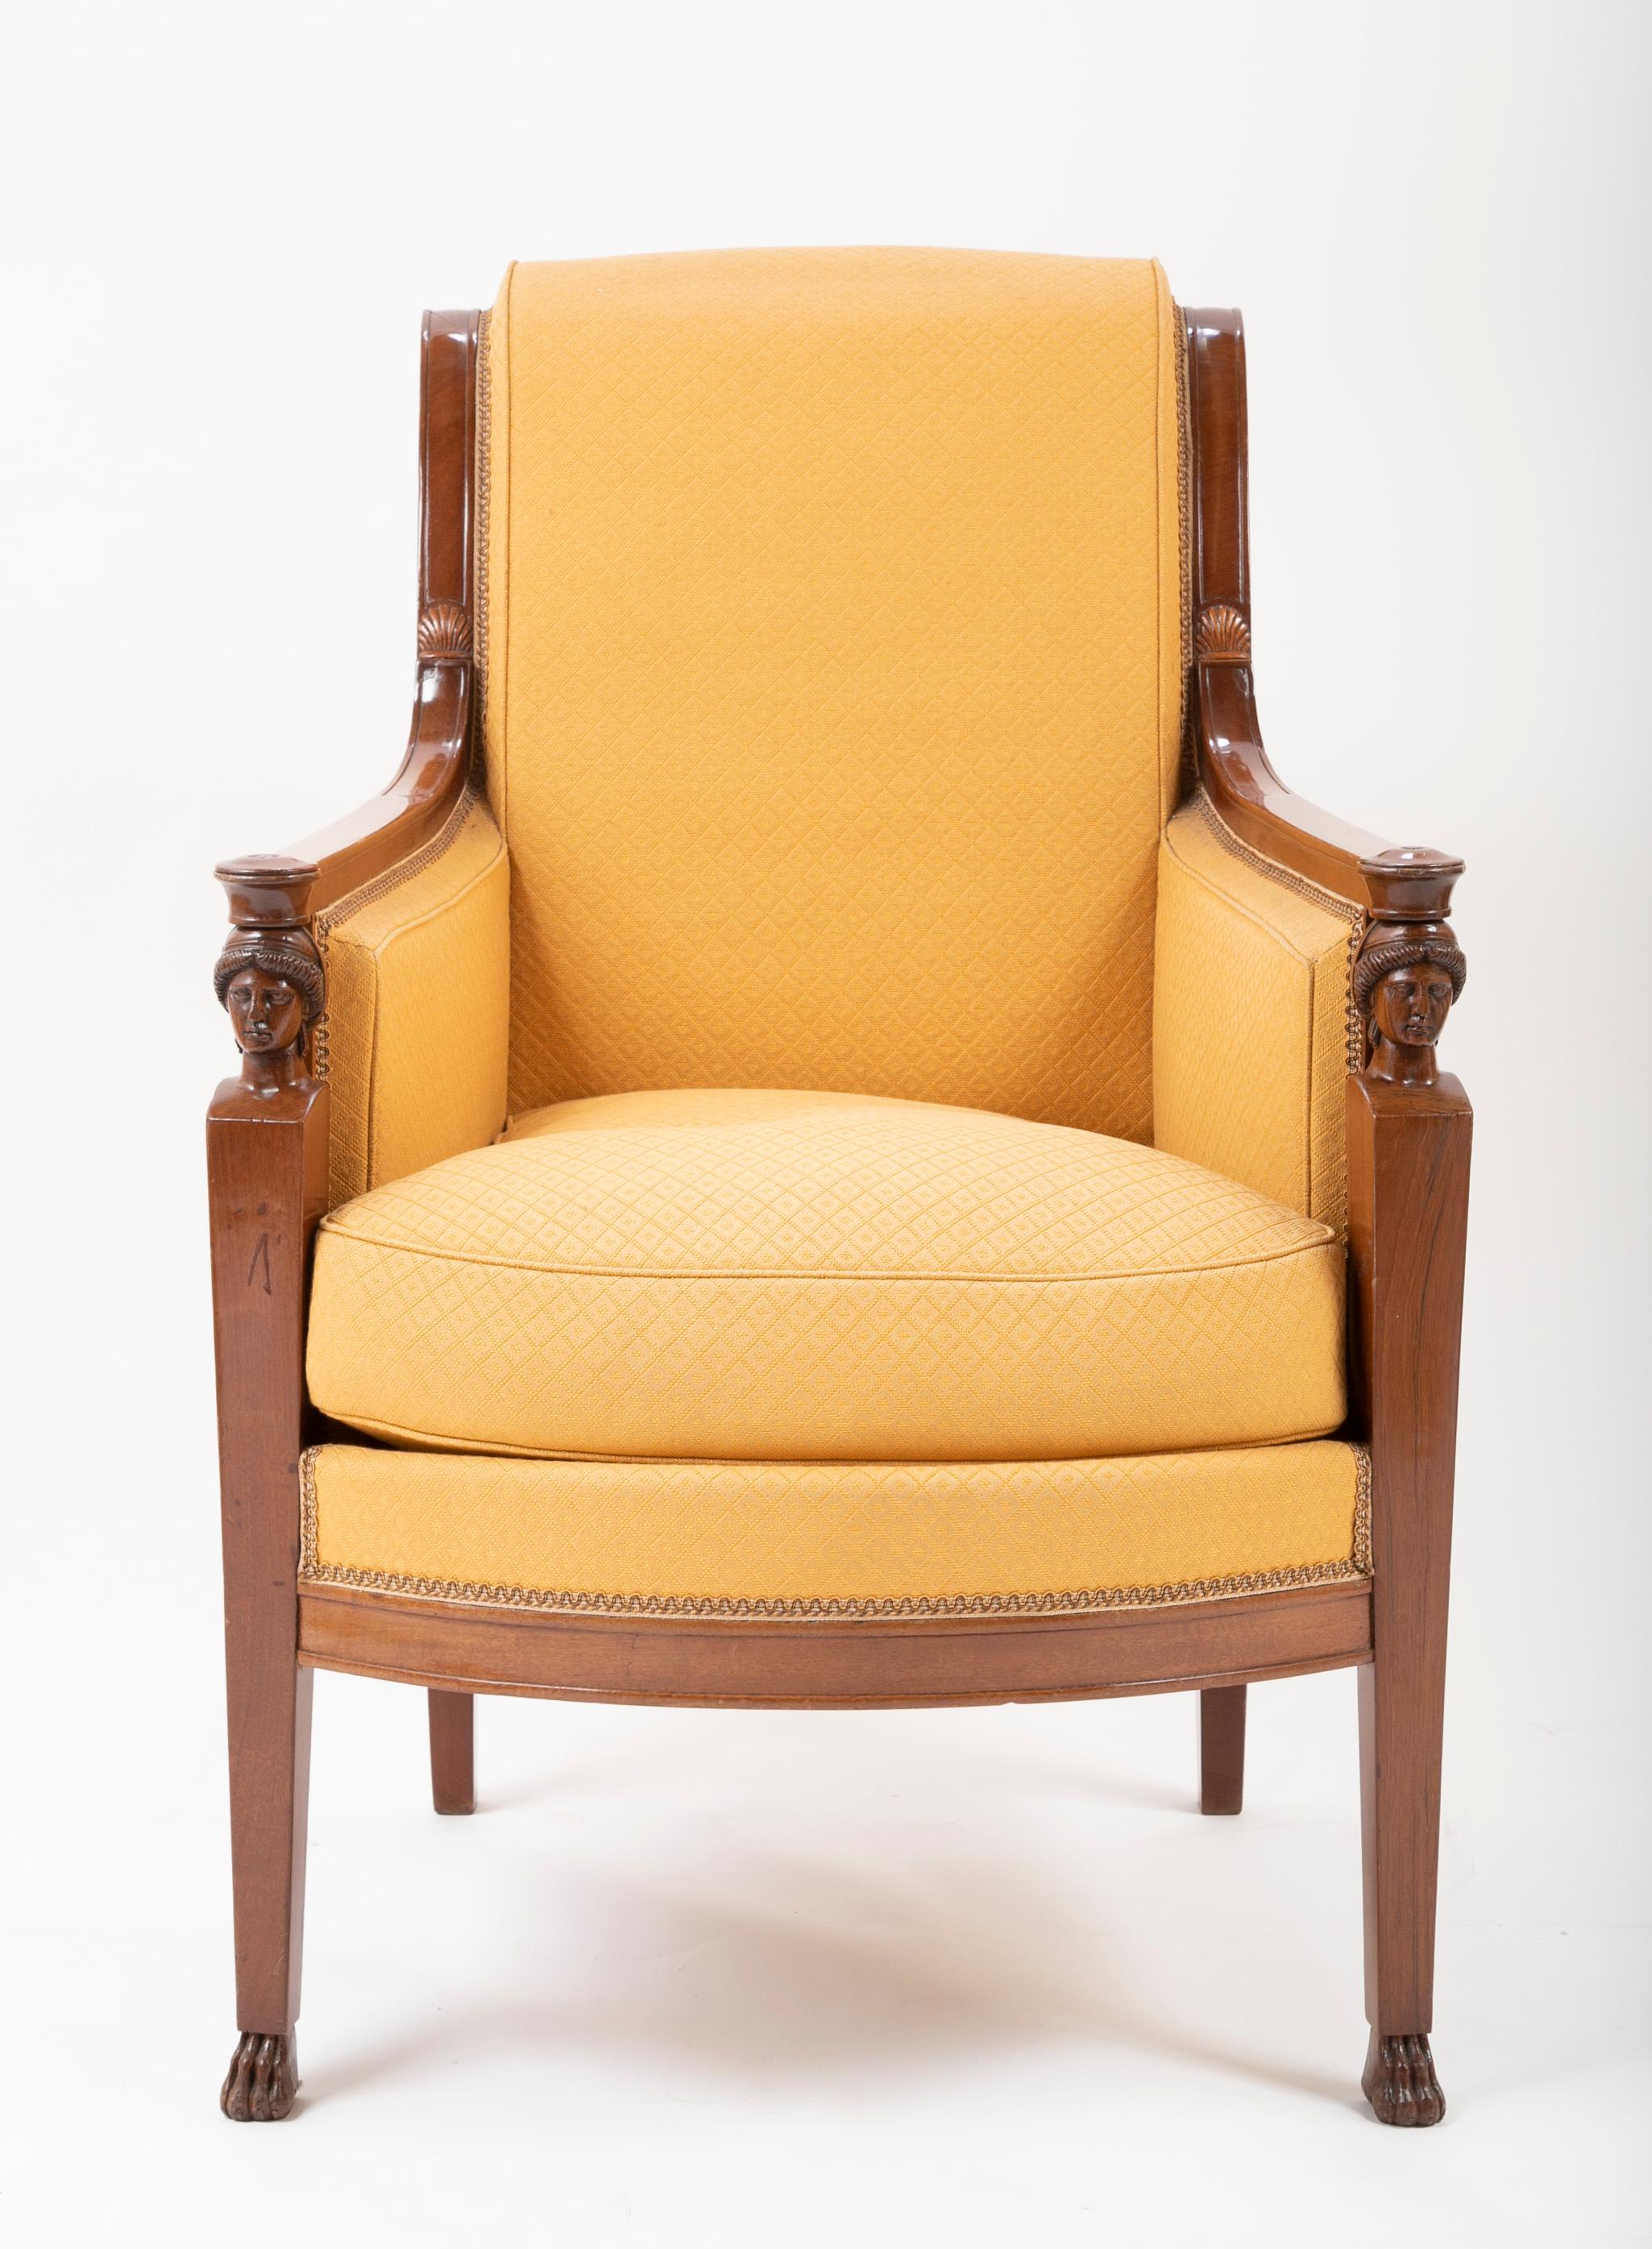 Mahogany Pair of French Consulat Armchairs in the Egyptian Revival Taste